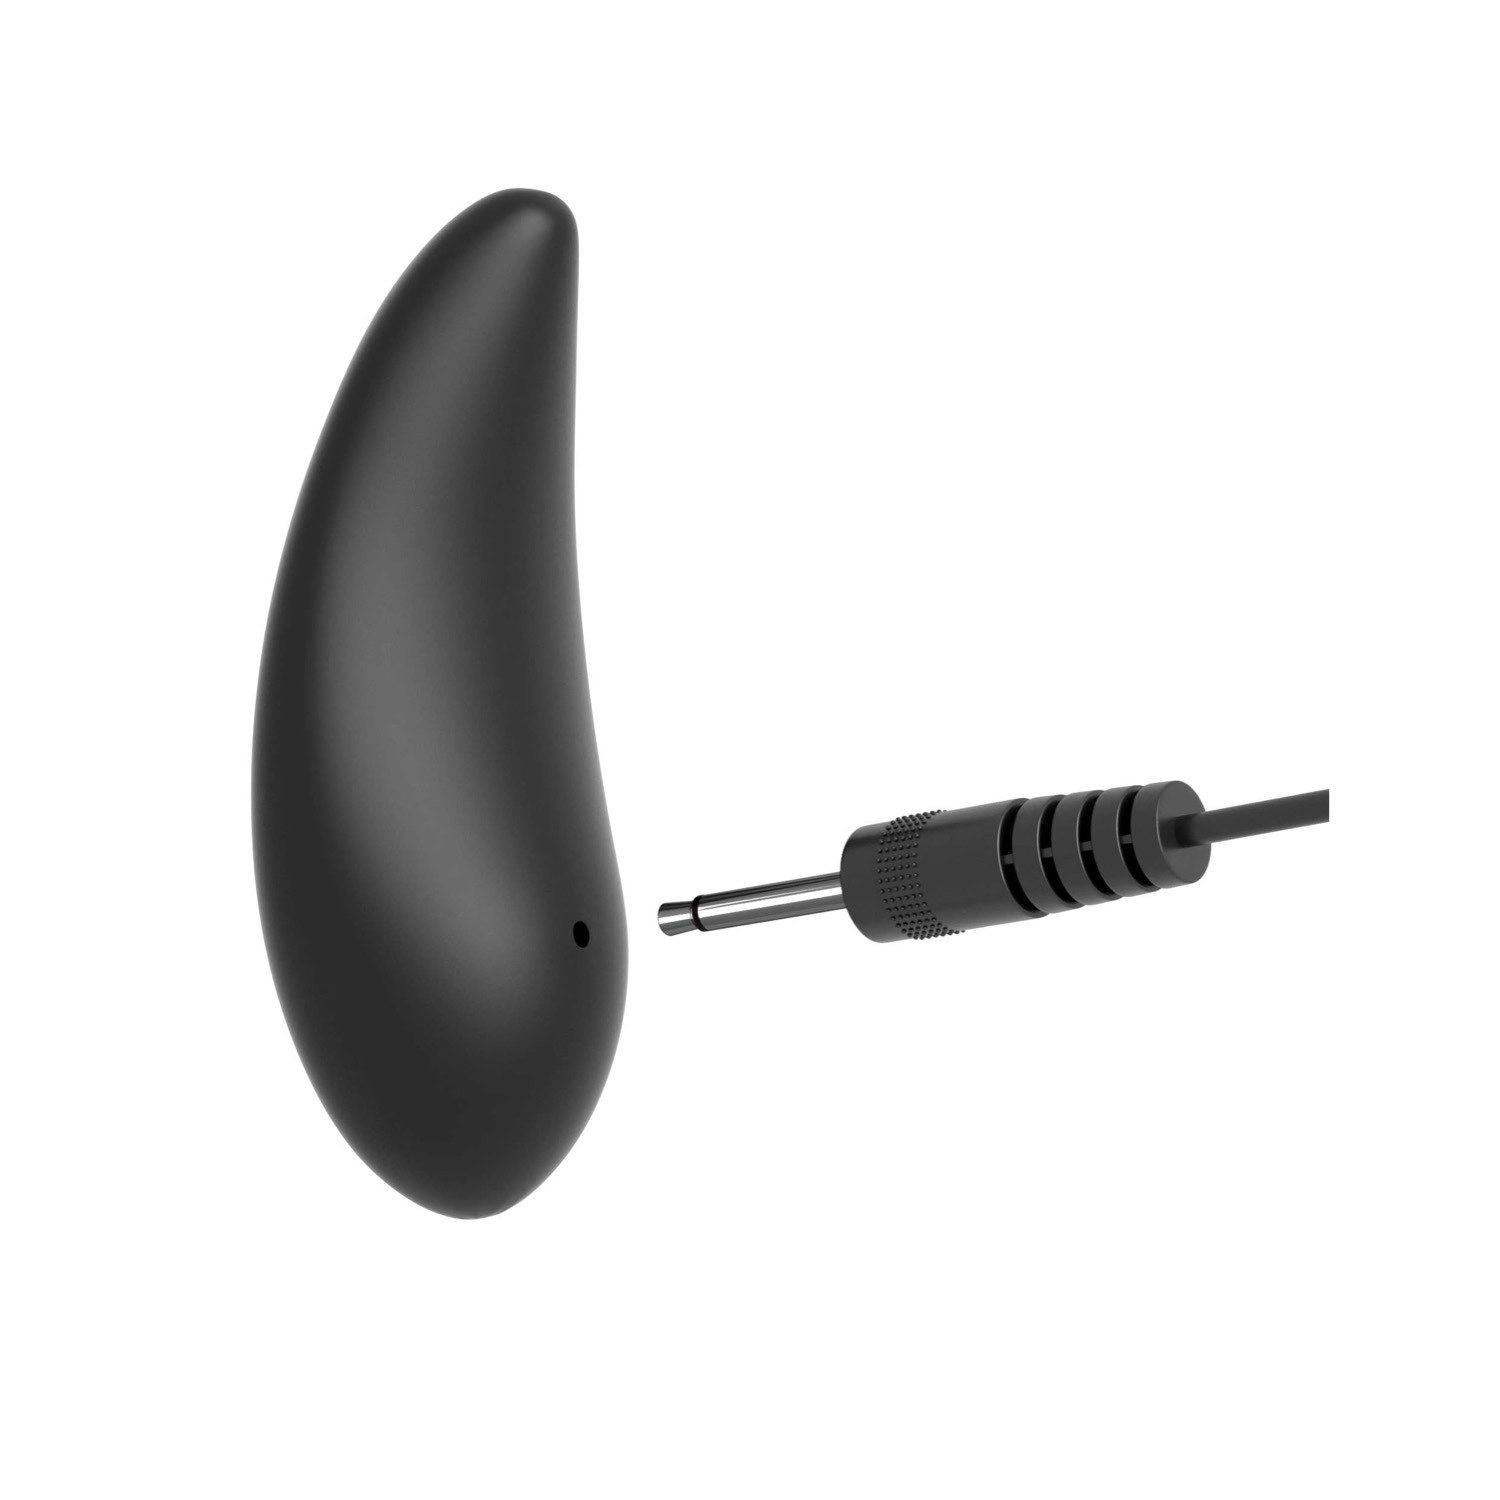 Fantasy C-Ringz Fantasy C-ringz Remote Control Double Penetrator - Black Cock Ring with Vibrating Anal Penetrator by Pipedream